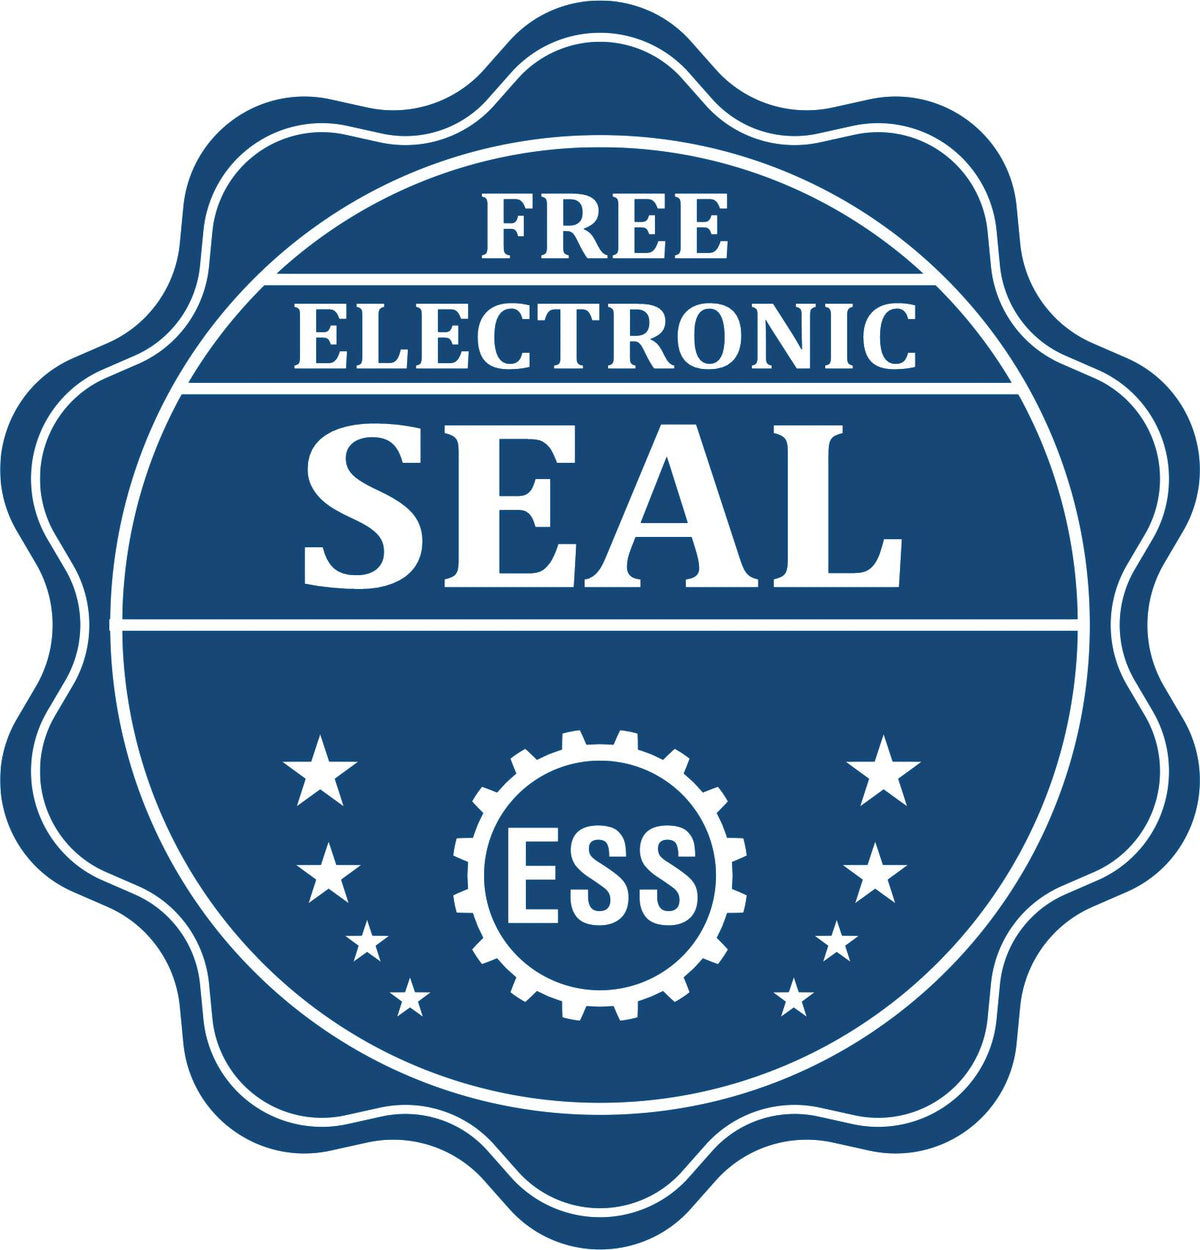 A badge showing a free electronic seal for the Super Slim New York Notary Public Stamp with stars and the ESS gear on the emblem.